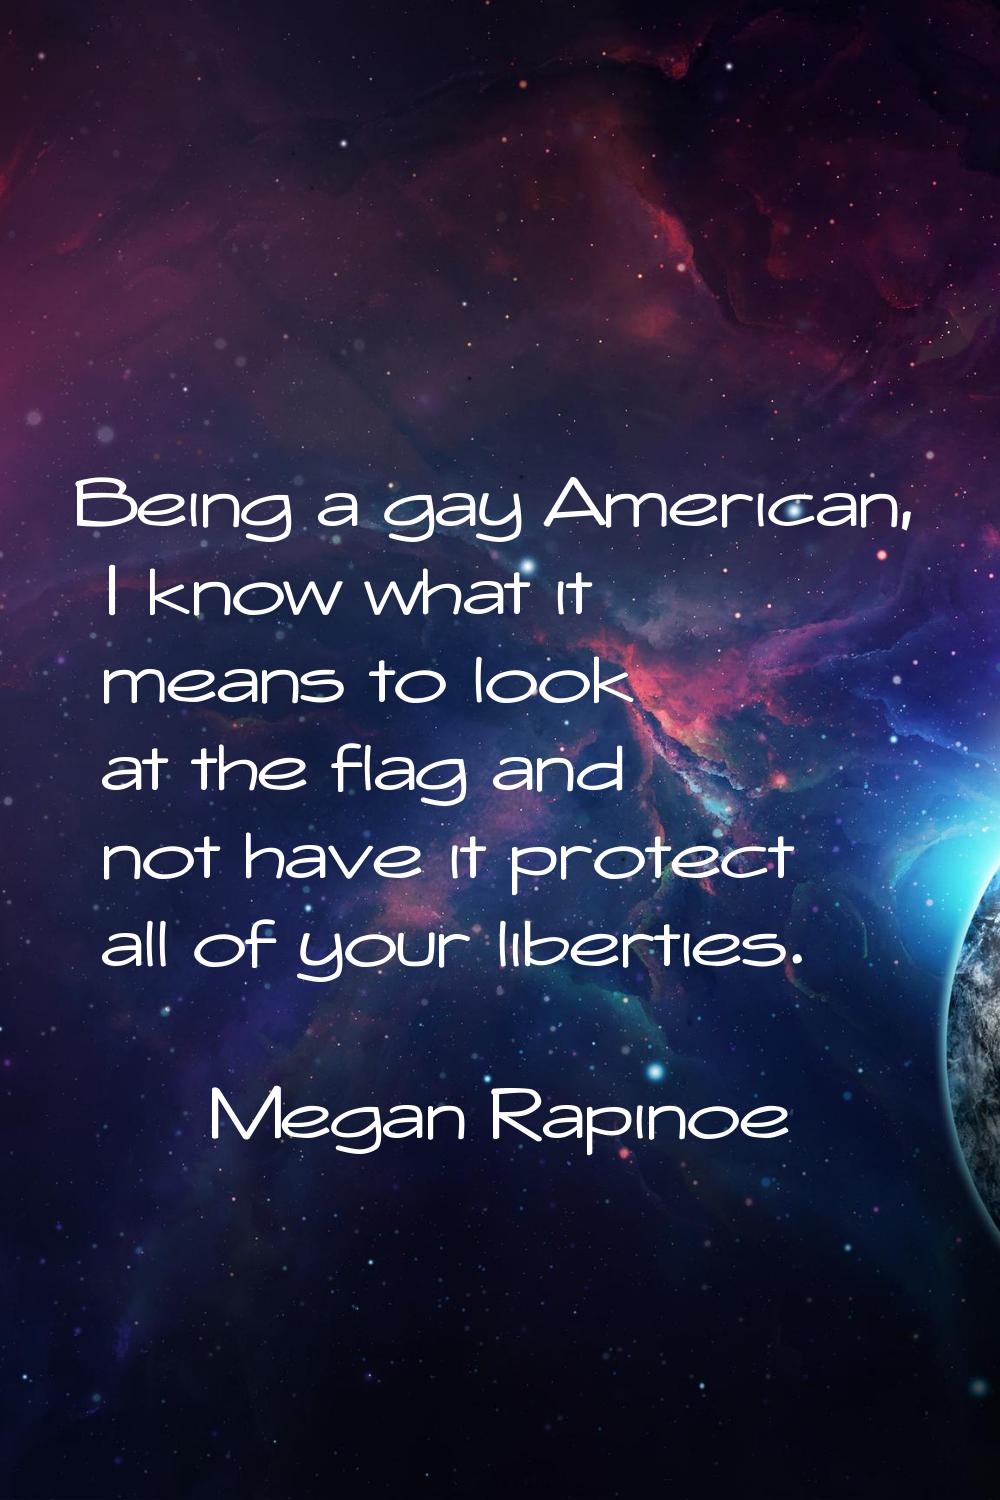 Being a gay American, I know what it means to look at the flag and not have it protect all of your 